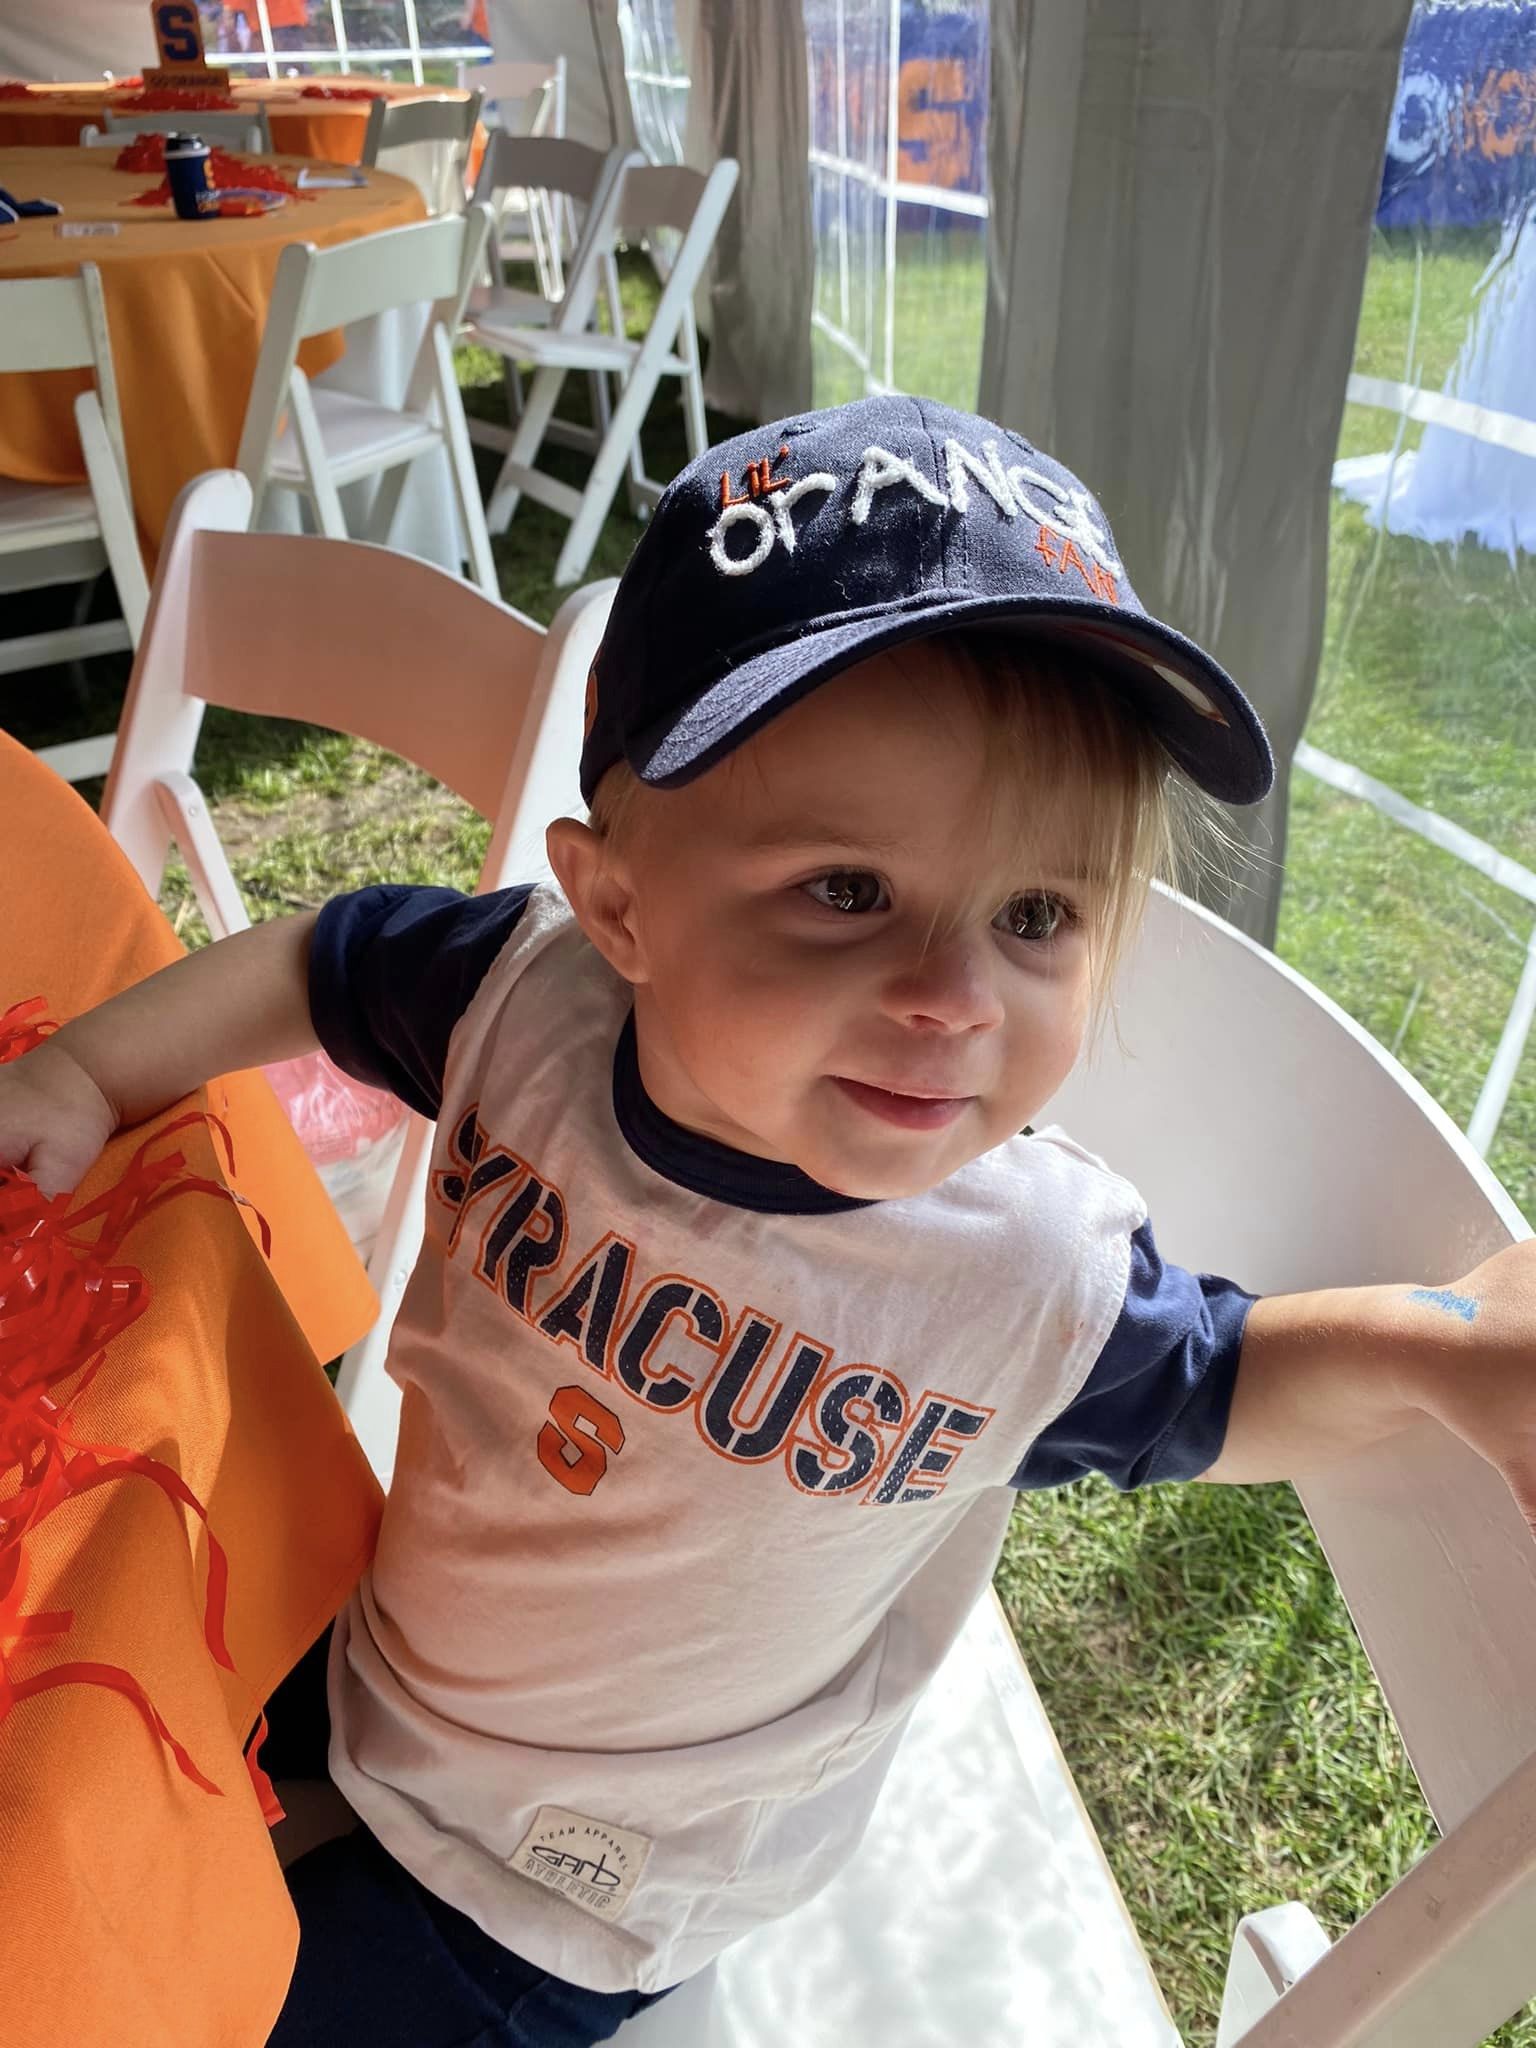 A young Syracuse University fan poses during the Orange Central Tailgate